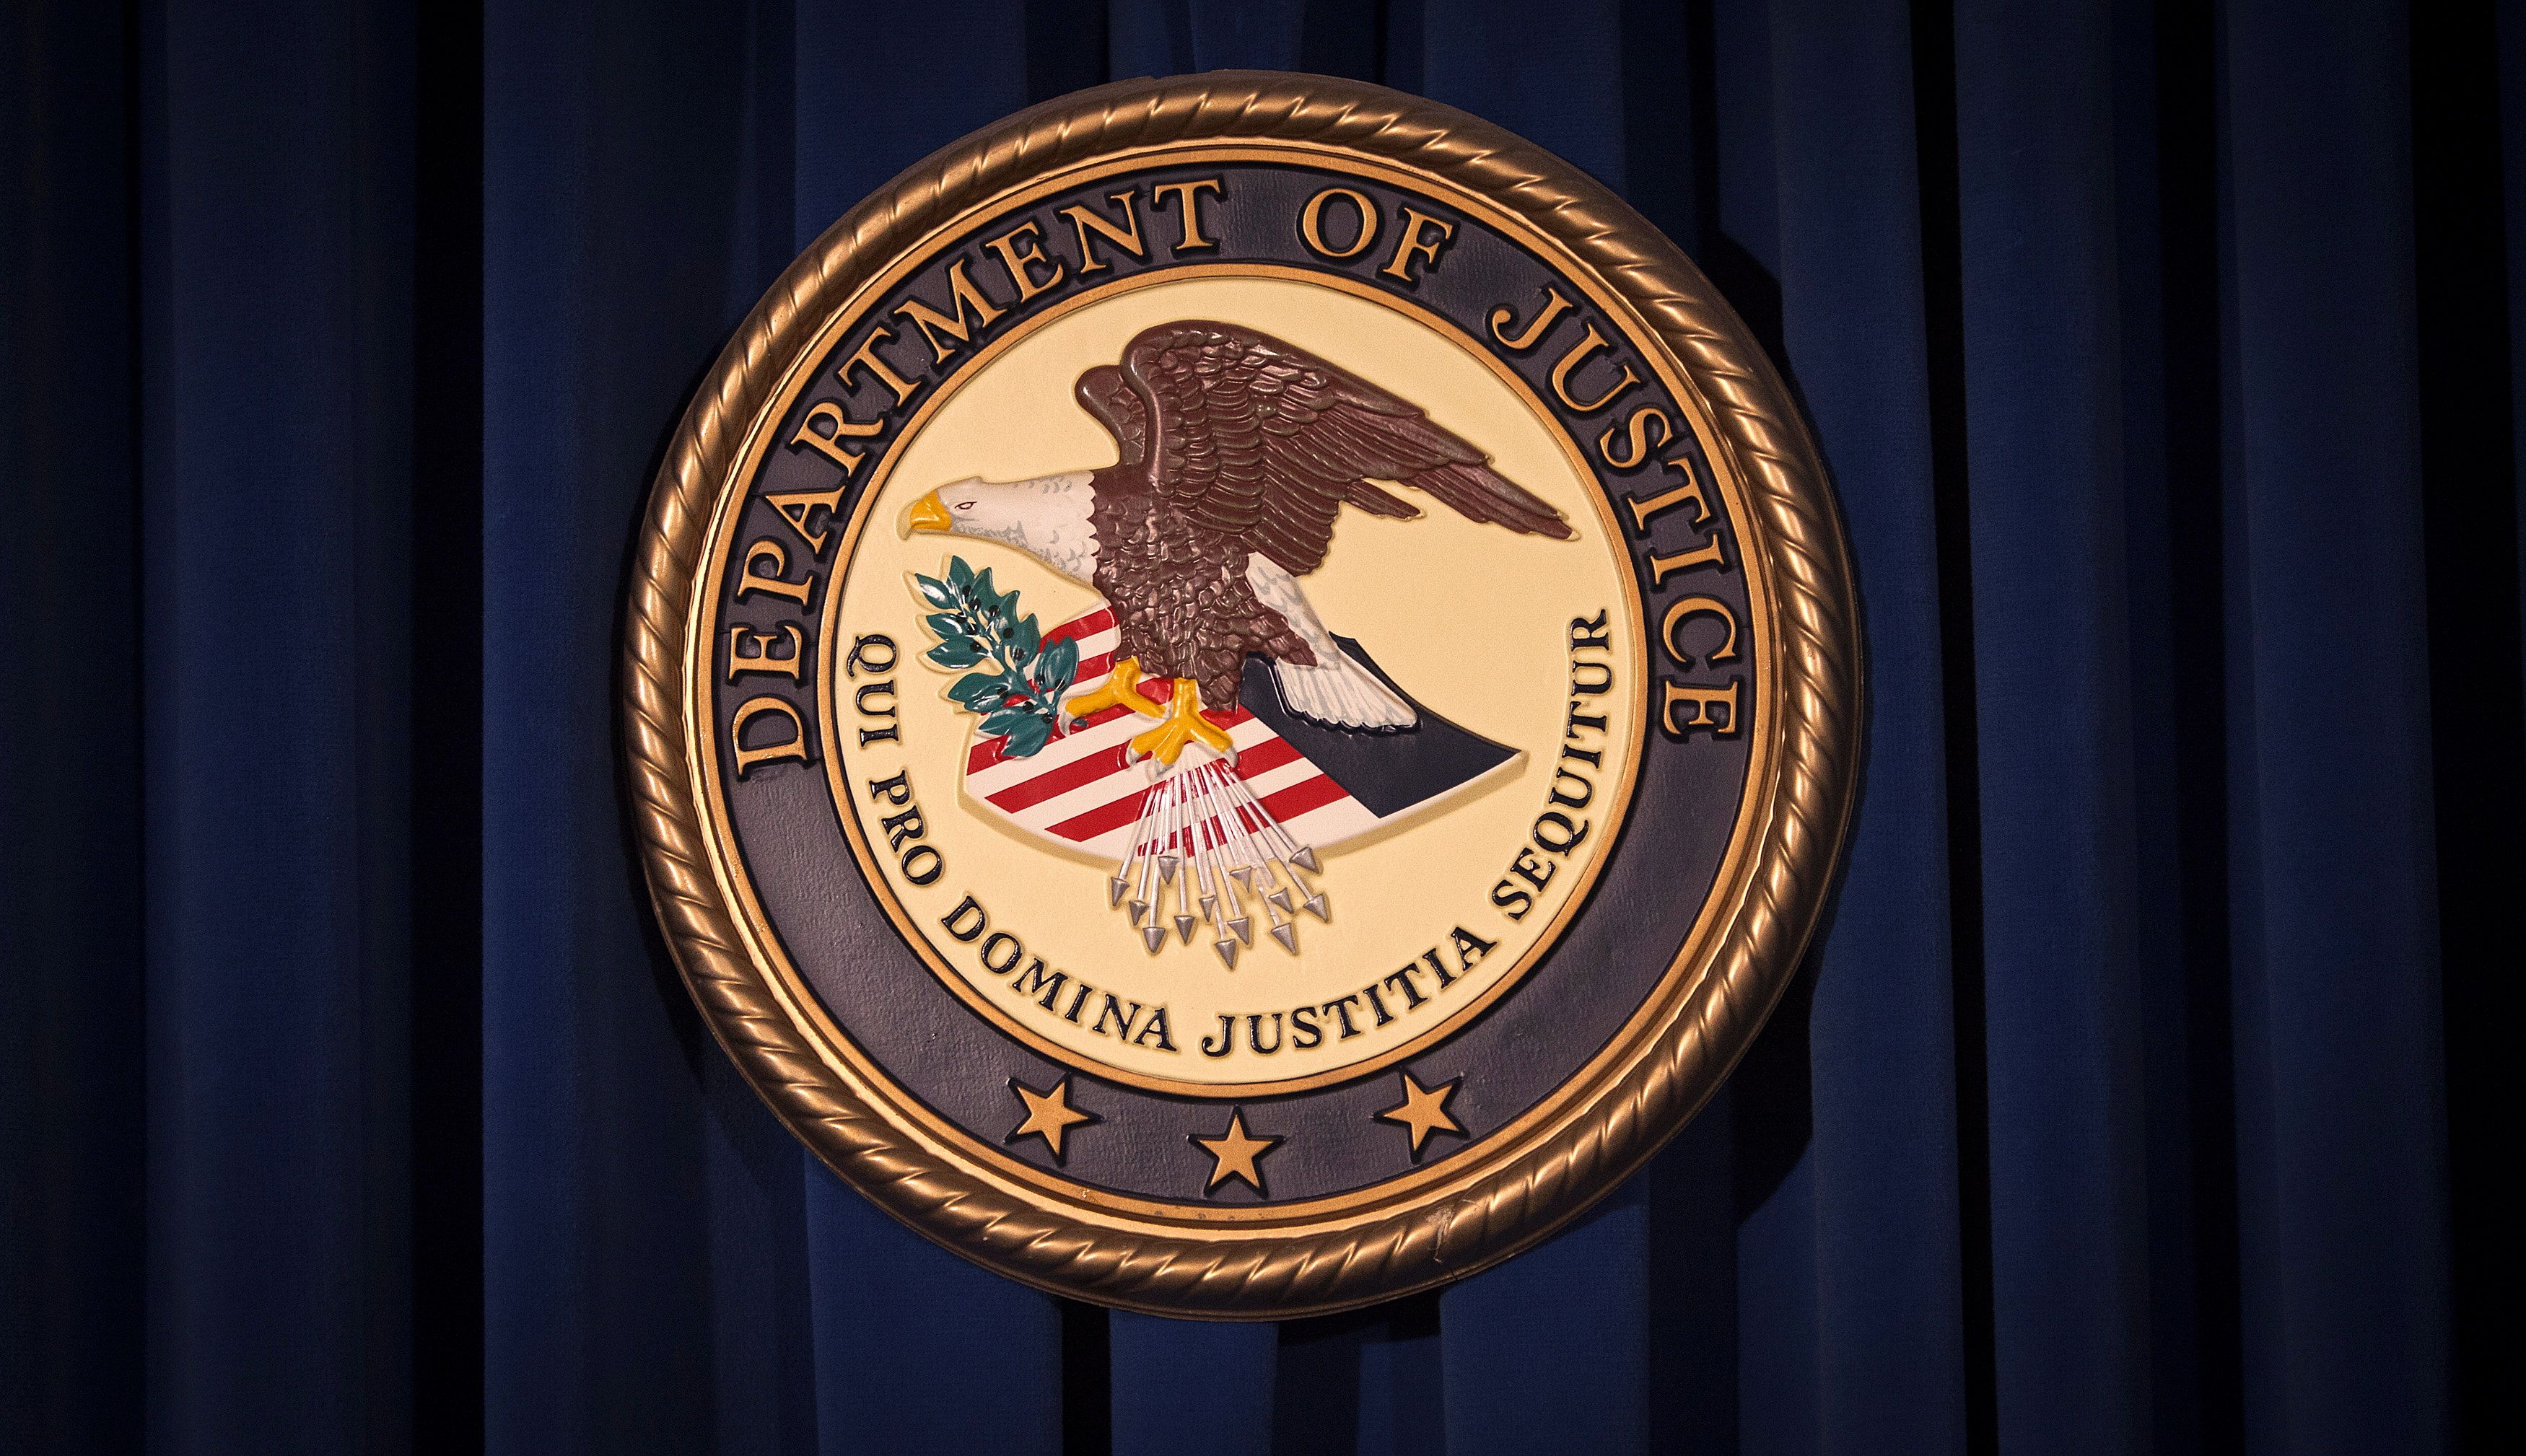 The Department of Justice (DOJ) logo is pictured on a wall after a news conference in New York December 5, 2013./File Photo